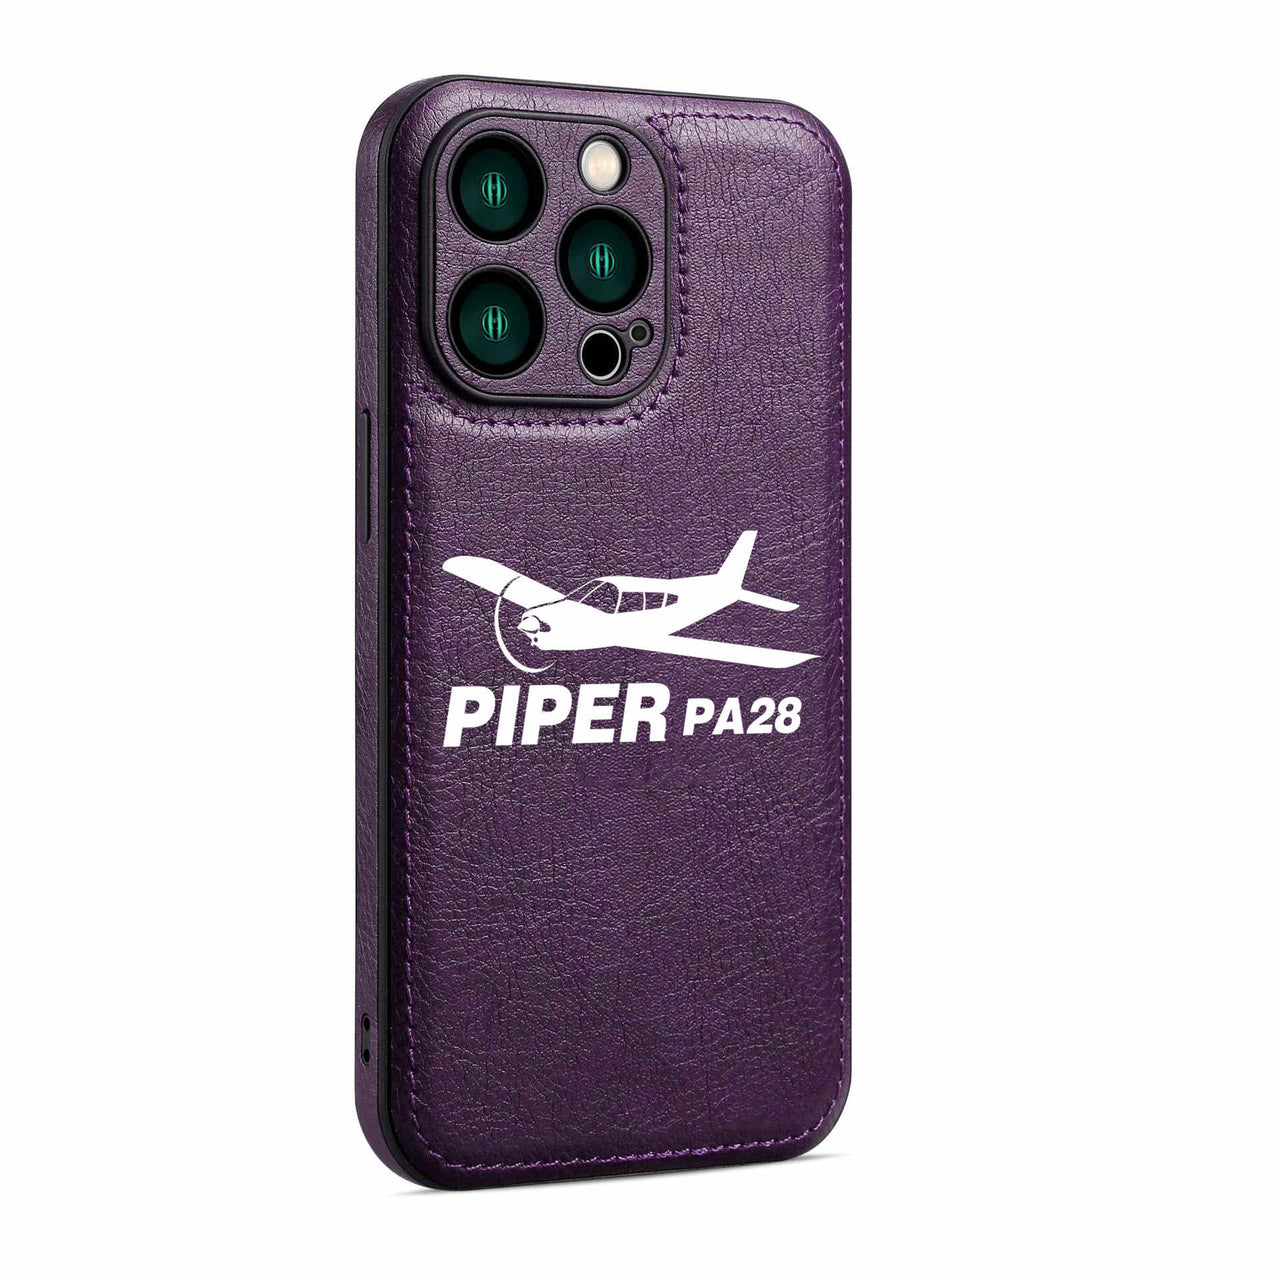 The Piper PA28 Designed Leather iPhone Cases